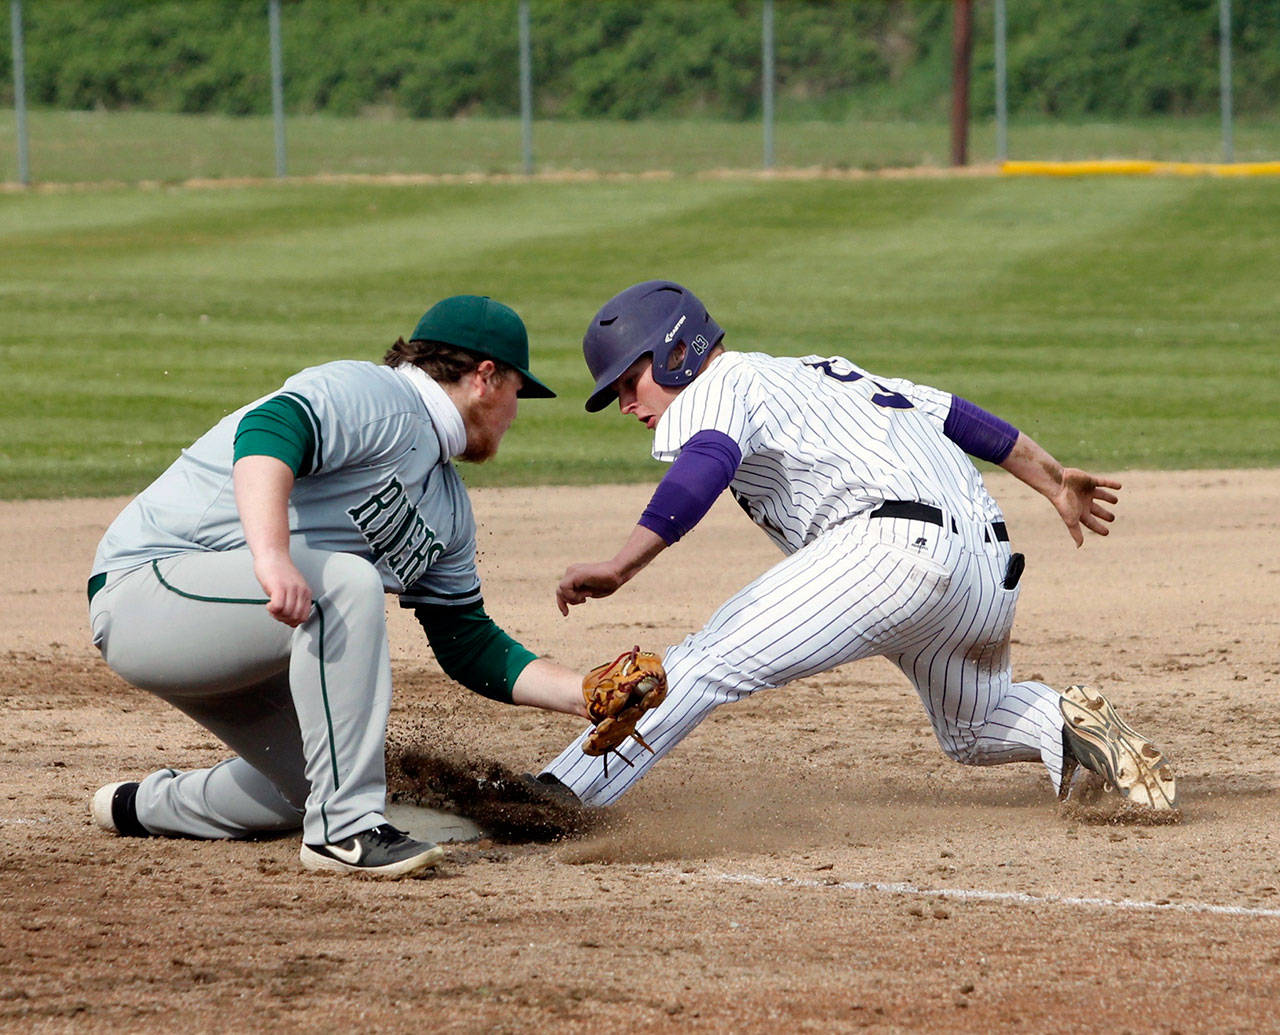 Port Angeles’ Seth Woods tries to put the tag on North Kitsap’s Colton Bower Friday in Poulsbo. The Roughriders won the game 9-4 after scoring eight runs in the seventh inning. (Mark Krulish/Olympic Peninsula News Group)